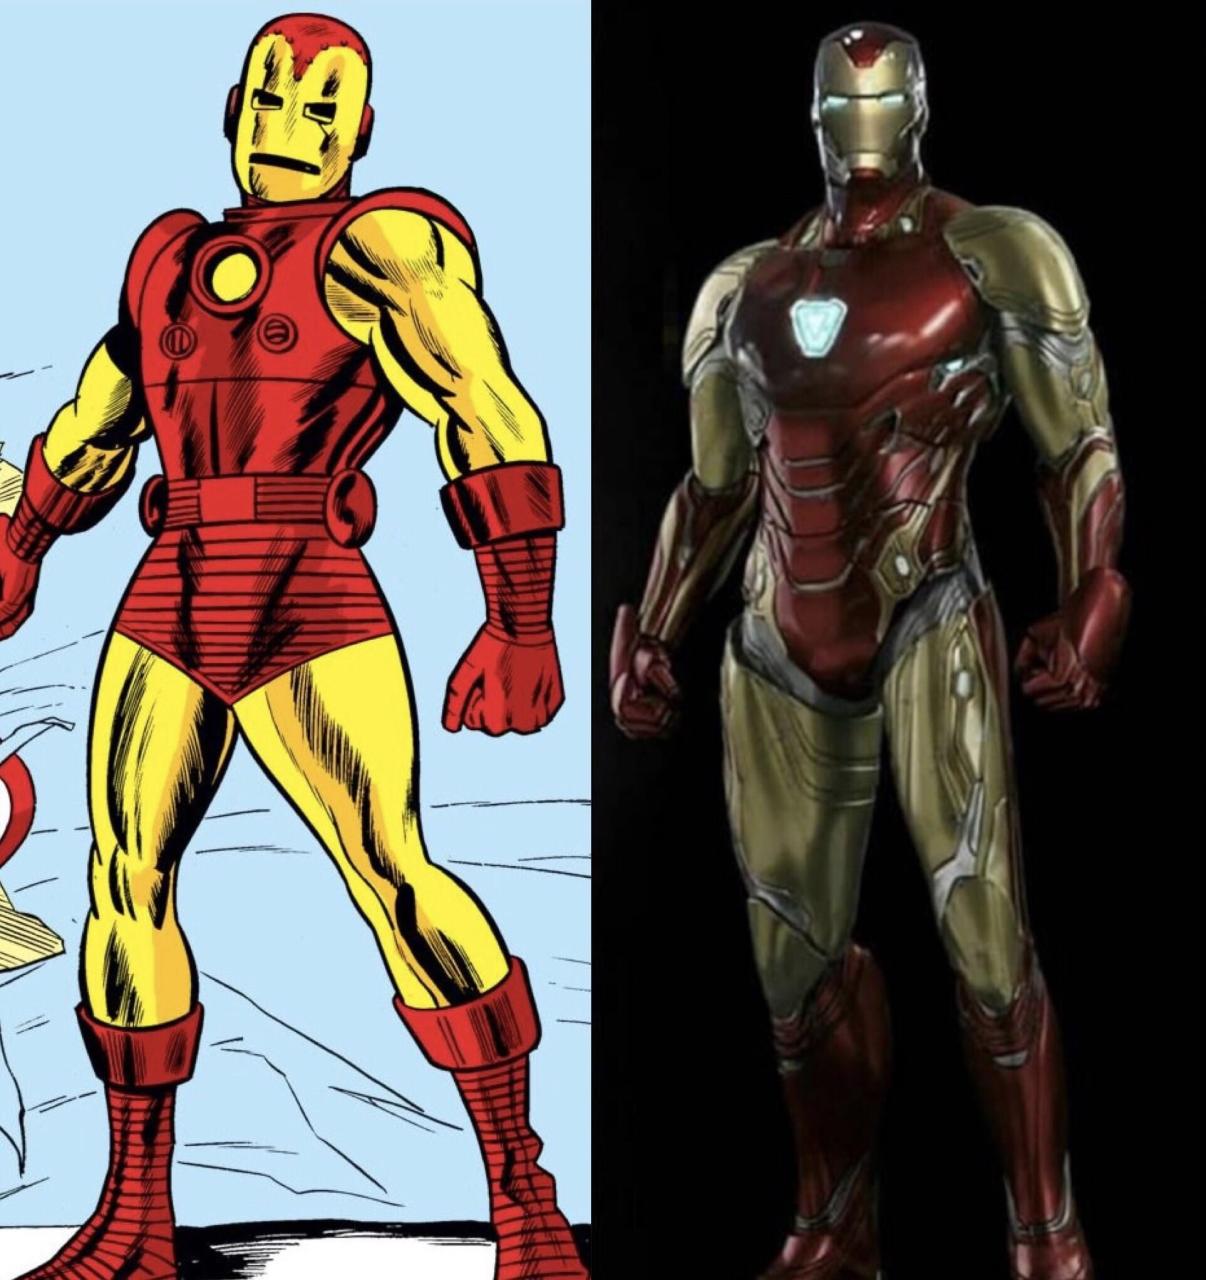 Iron Man'S End Game Suit Looks To Be A Throw Back To The Original Red And  Gold Suit From 1963. | Iron Man, Iron Man Art, Gold Suit